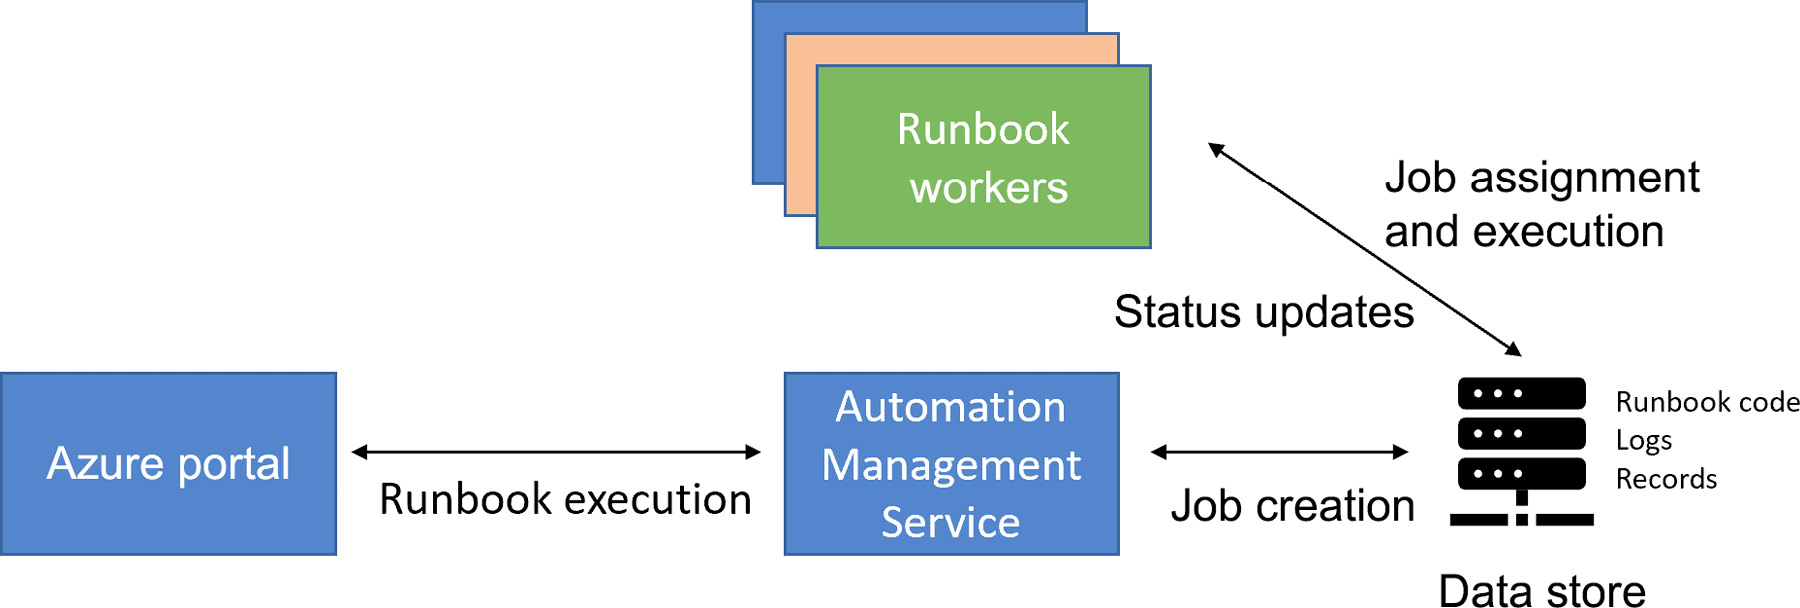 Azure Automation architecture, showing how the Azure portal works with the Automation Management Service, Runbook Workers, and the Data Store for Runbook execution, Job creation, assignment, and execution.